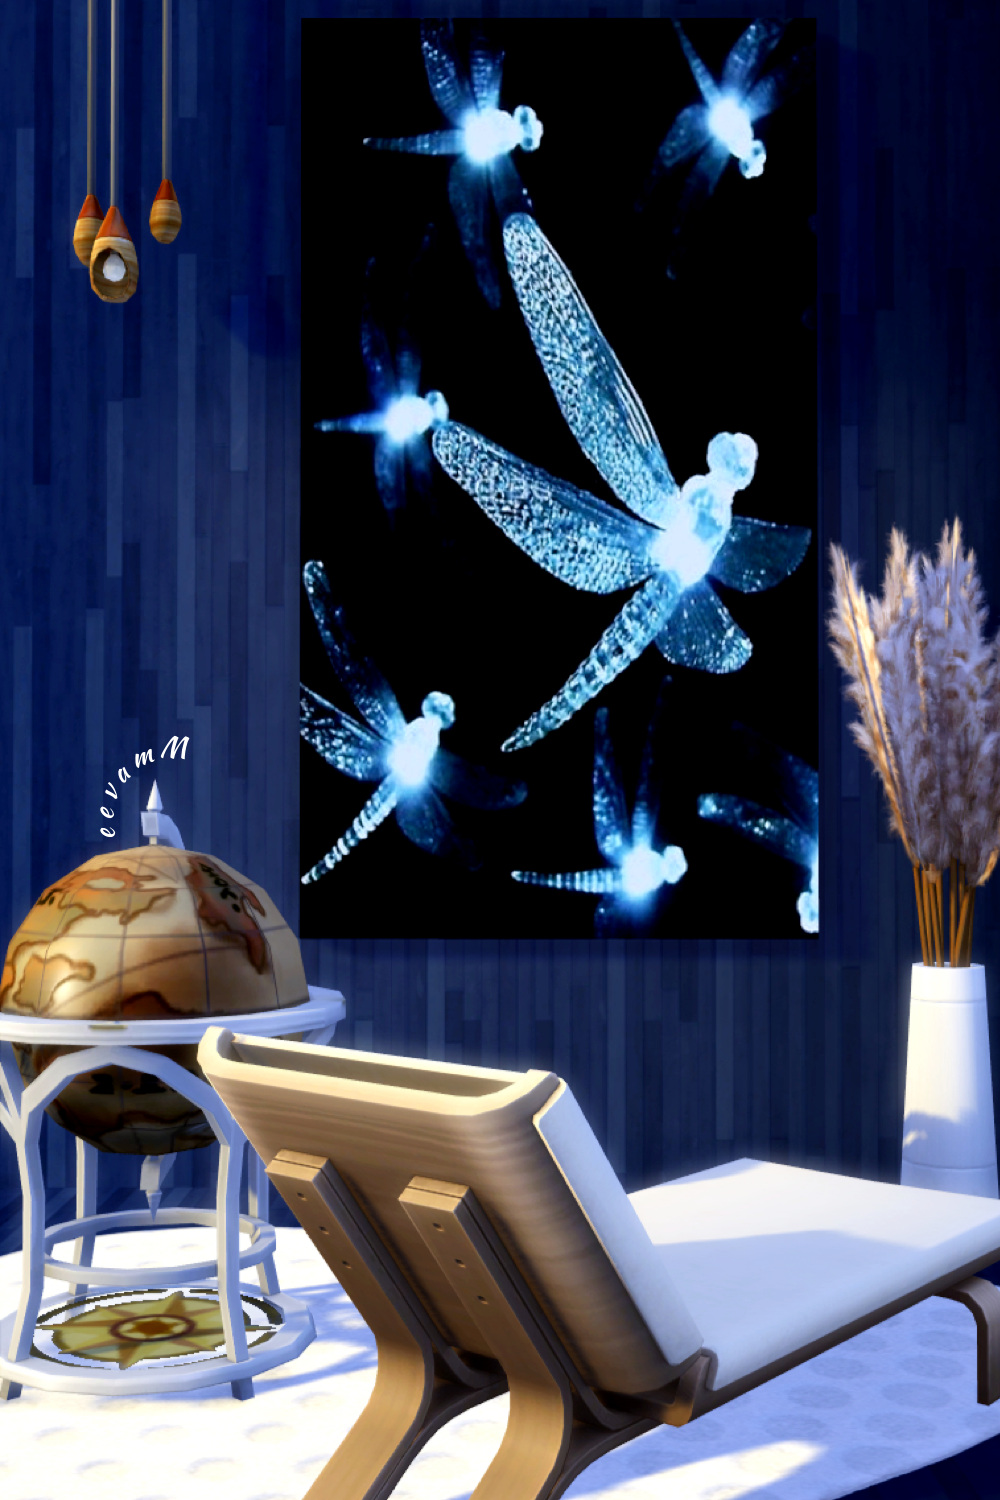 eevam; sims 4; the sims 4; sims 4 wall art; the sims 4 paintings; the sims 4 nocc; Ts4 Decor; eevamM; SFS;